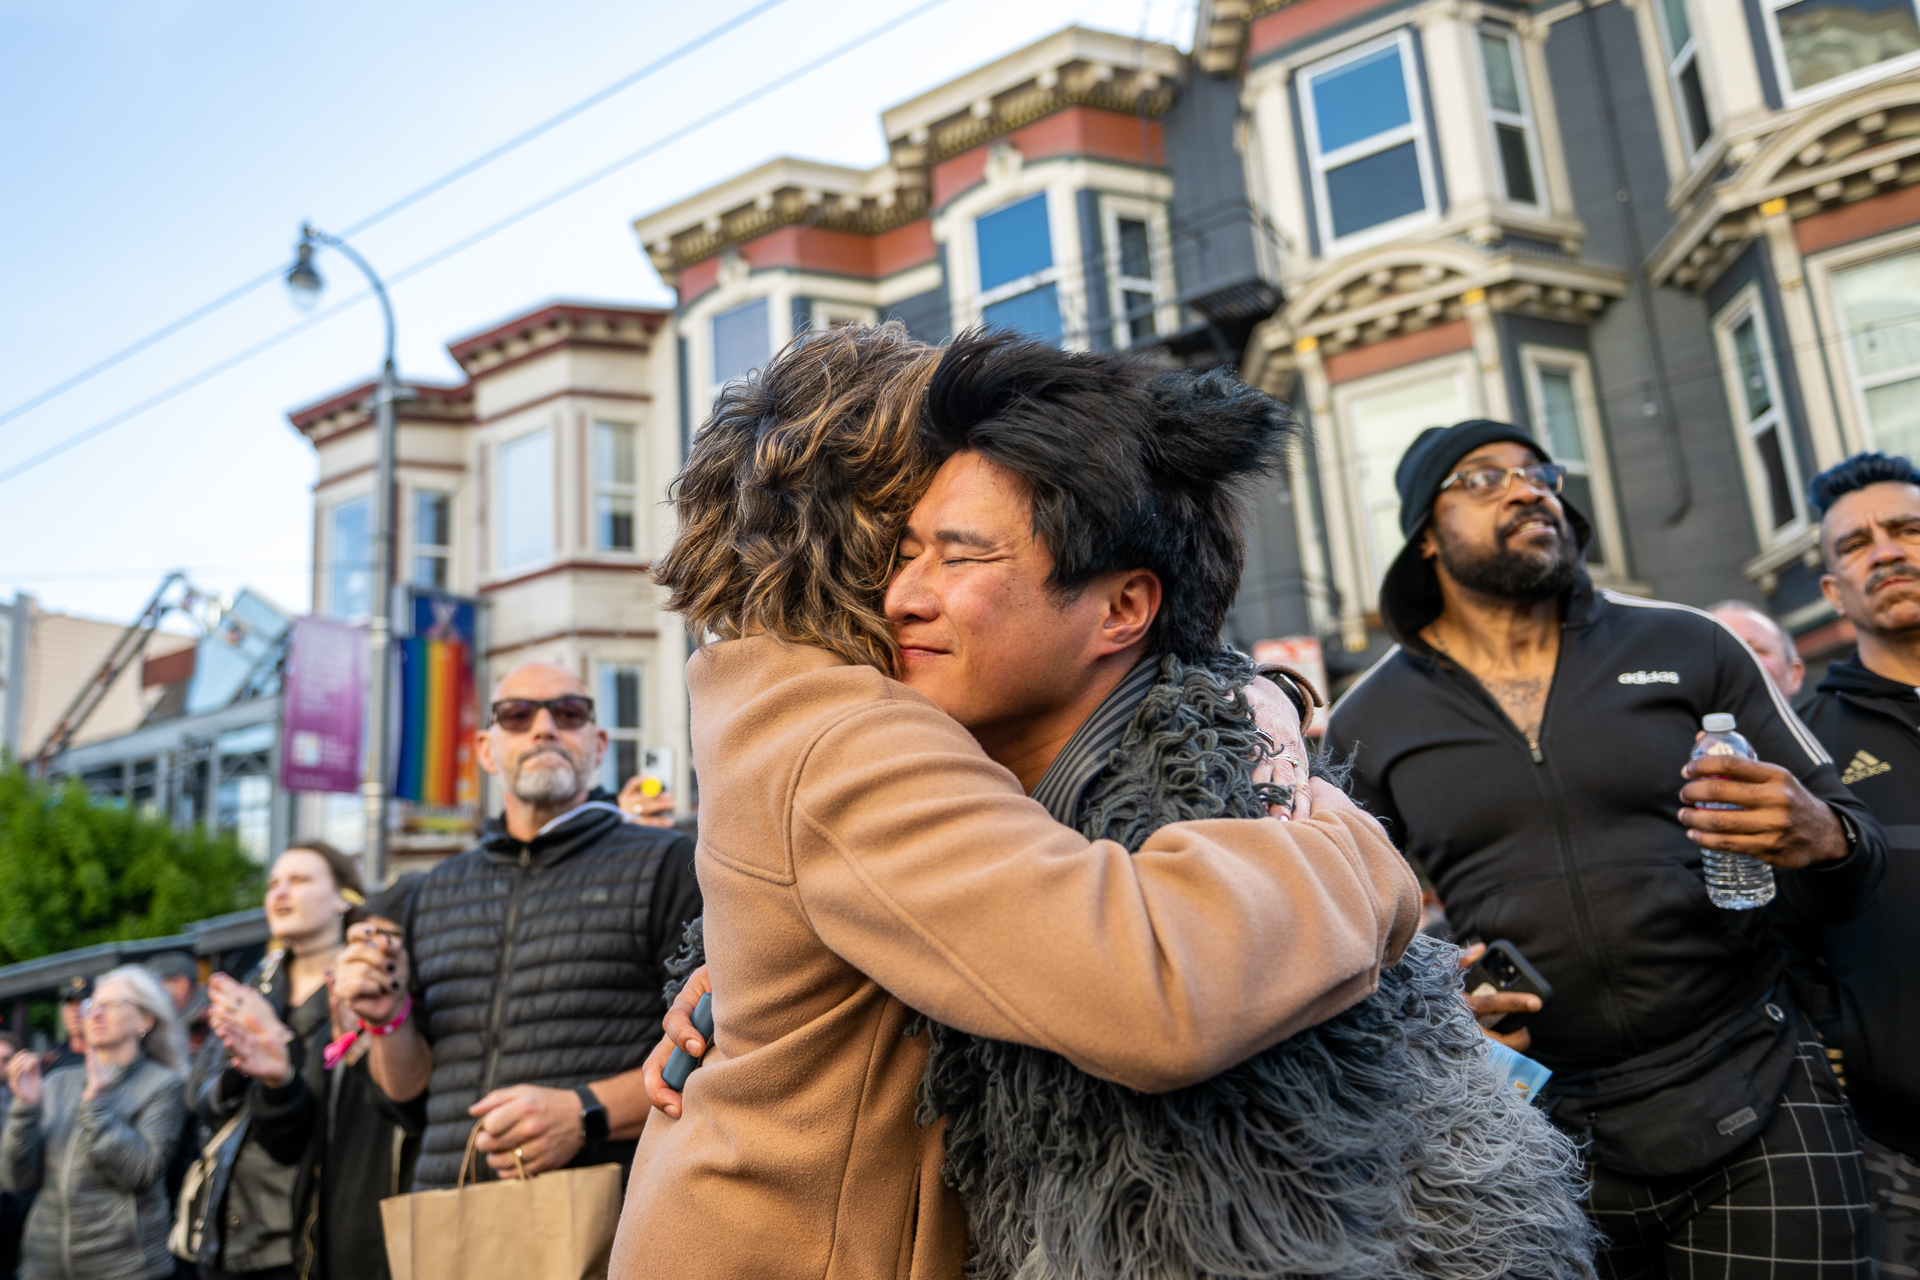 Two people share a deep hug and smile while they stand outdoors in San Francisco's Castro Street, surrounded by a large crowd.